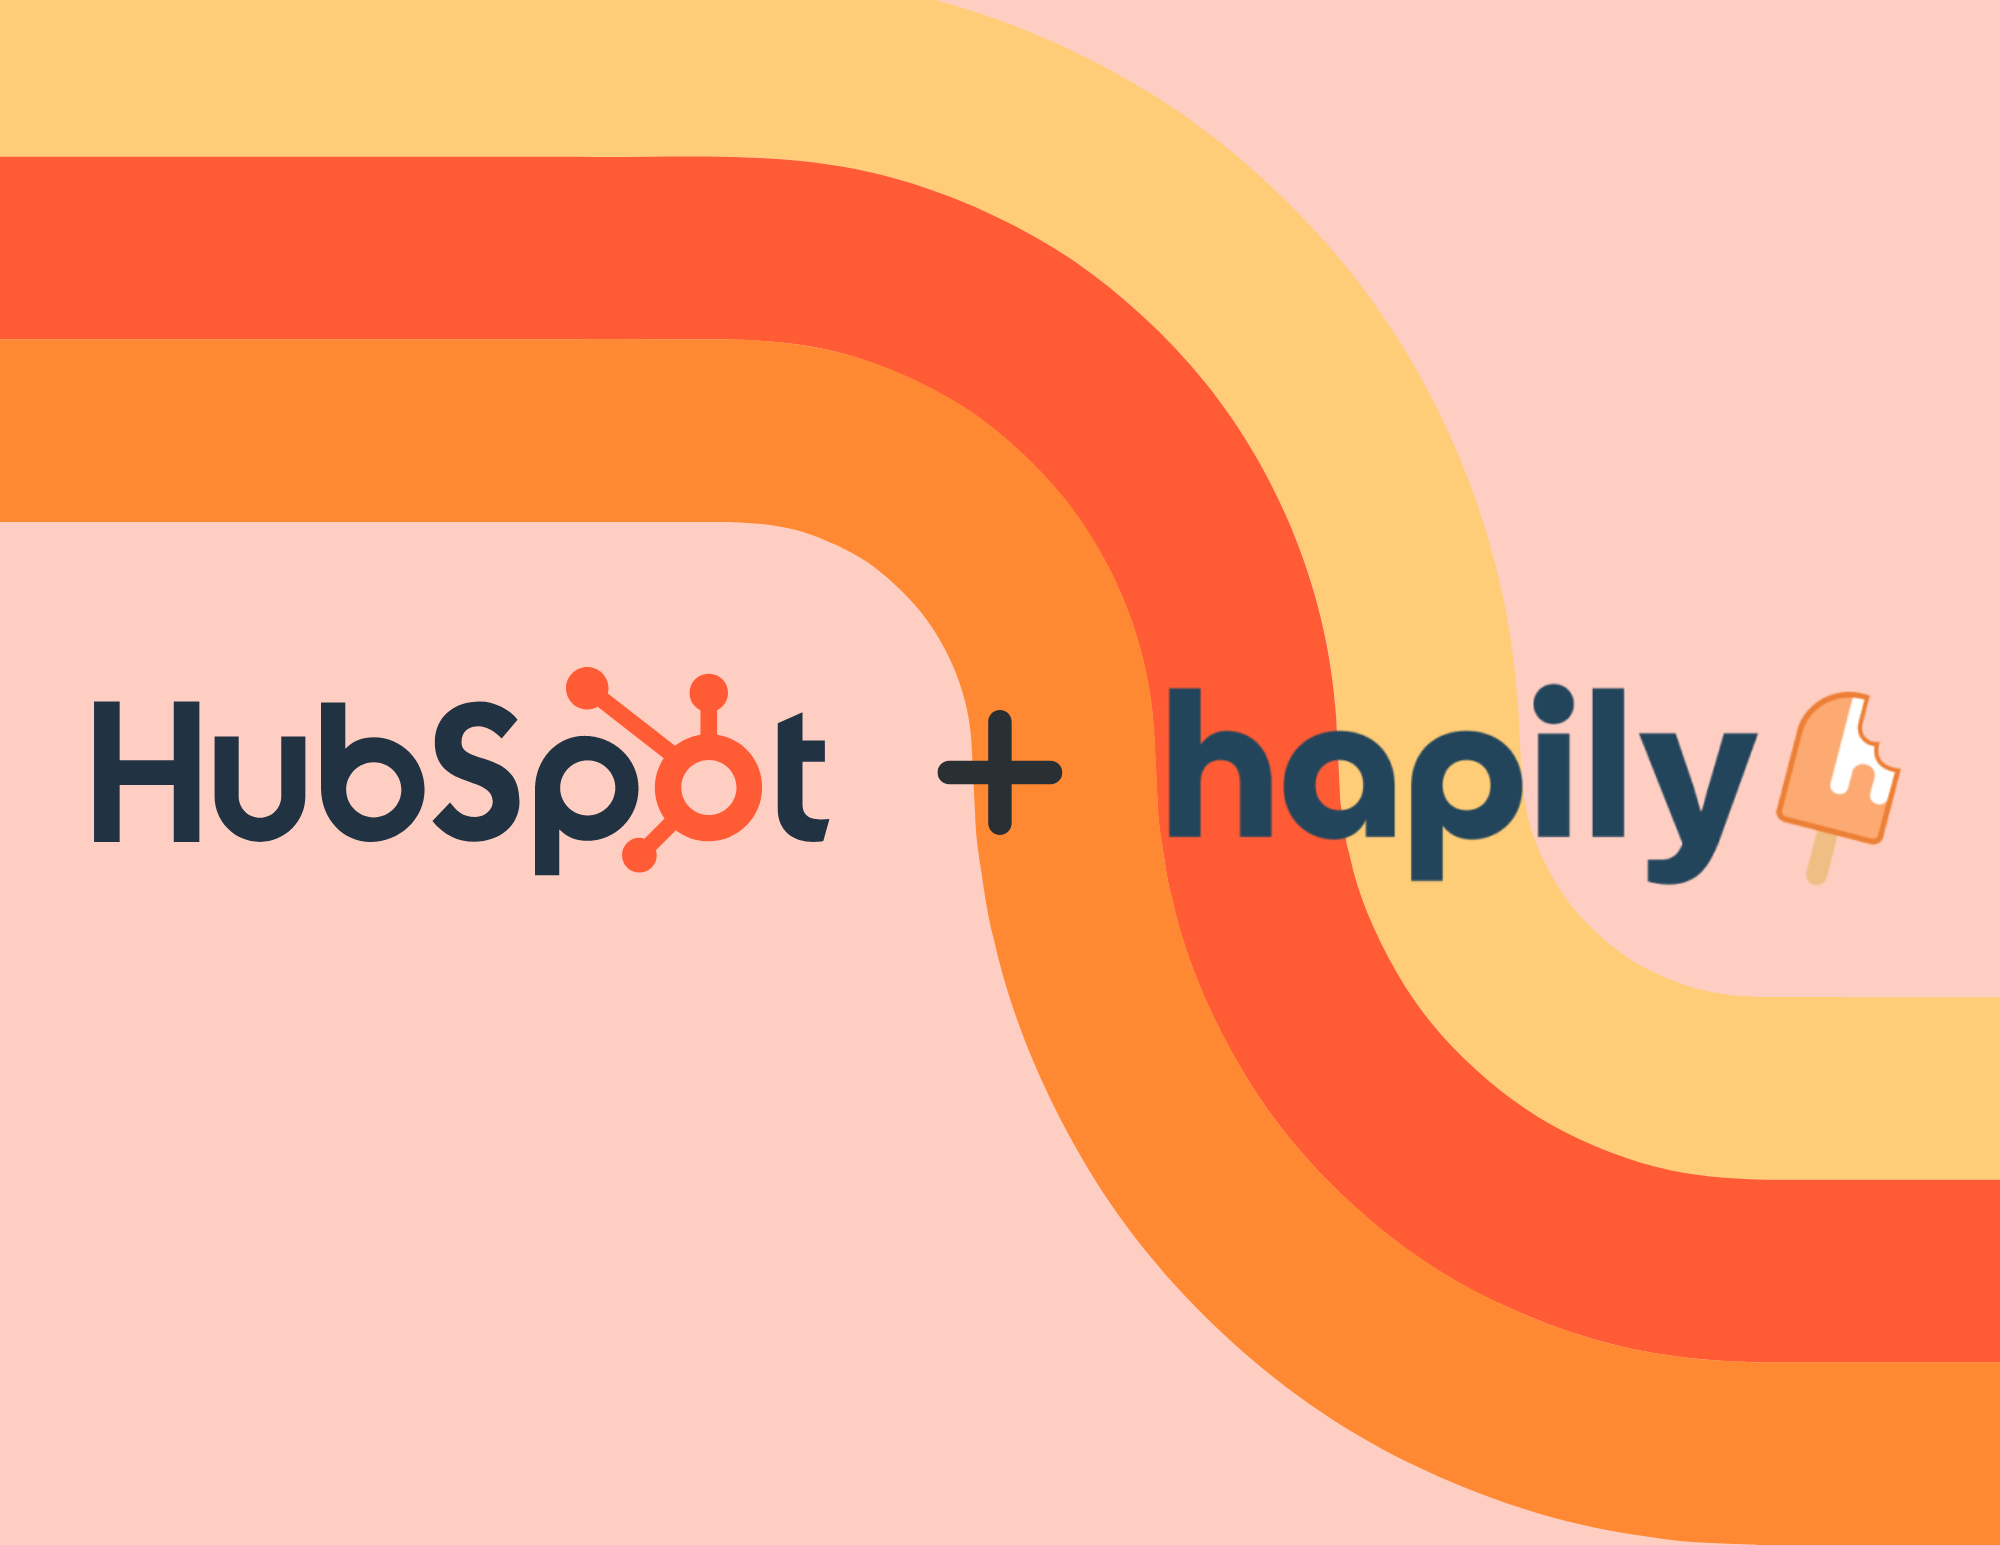 HubSpot Invests in hapily - an App Studio Helping Extend the Power of the CRM Platform and Accelerate Ecosystem Growth